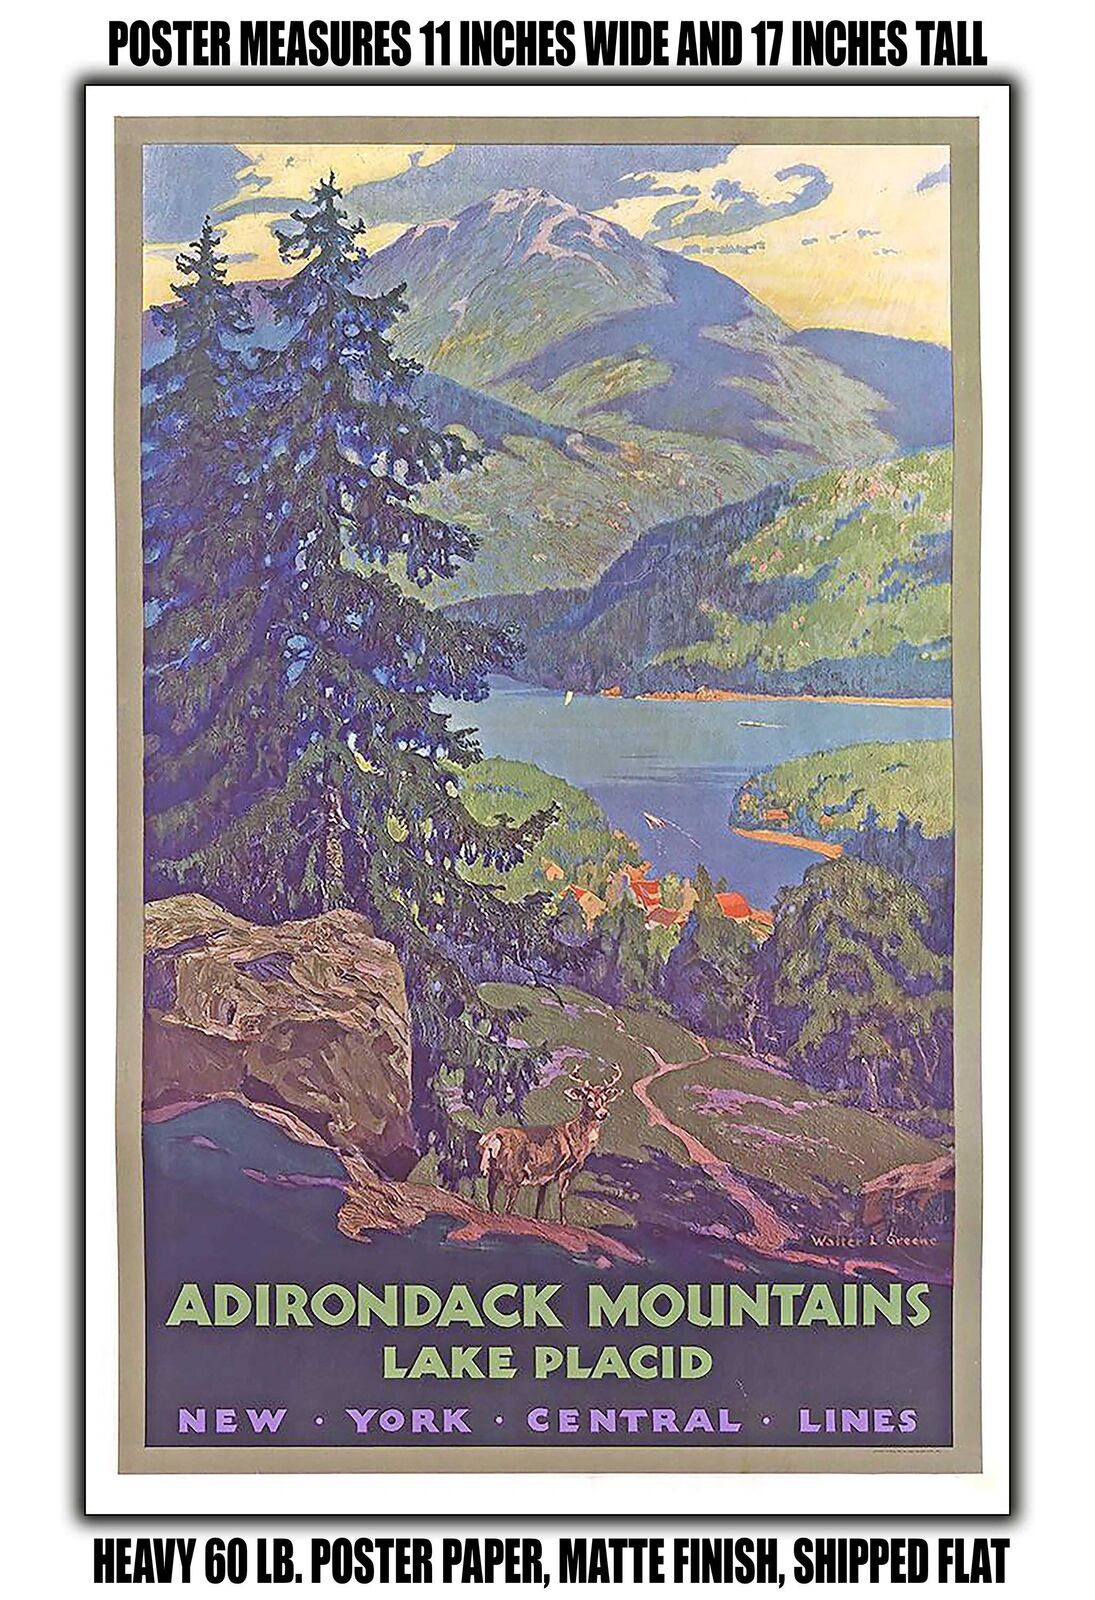 11x17 POSTER - 1935 Adirondack Mountains Lake Placid New York Central Lines